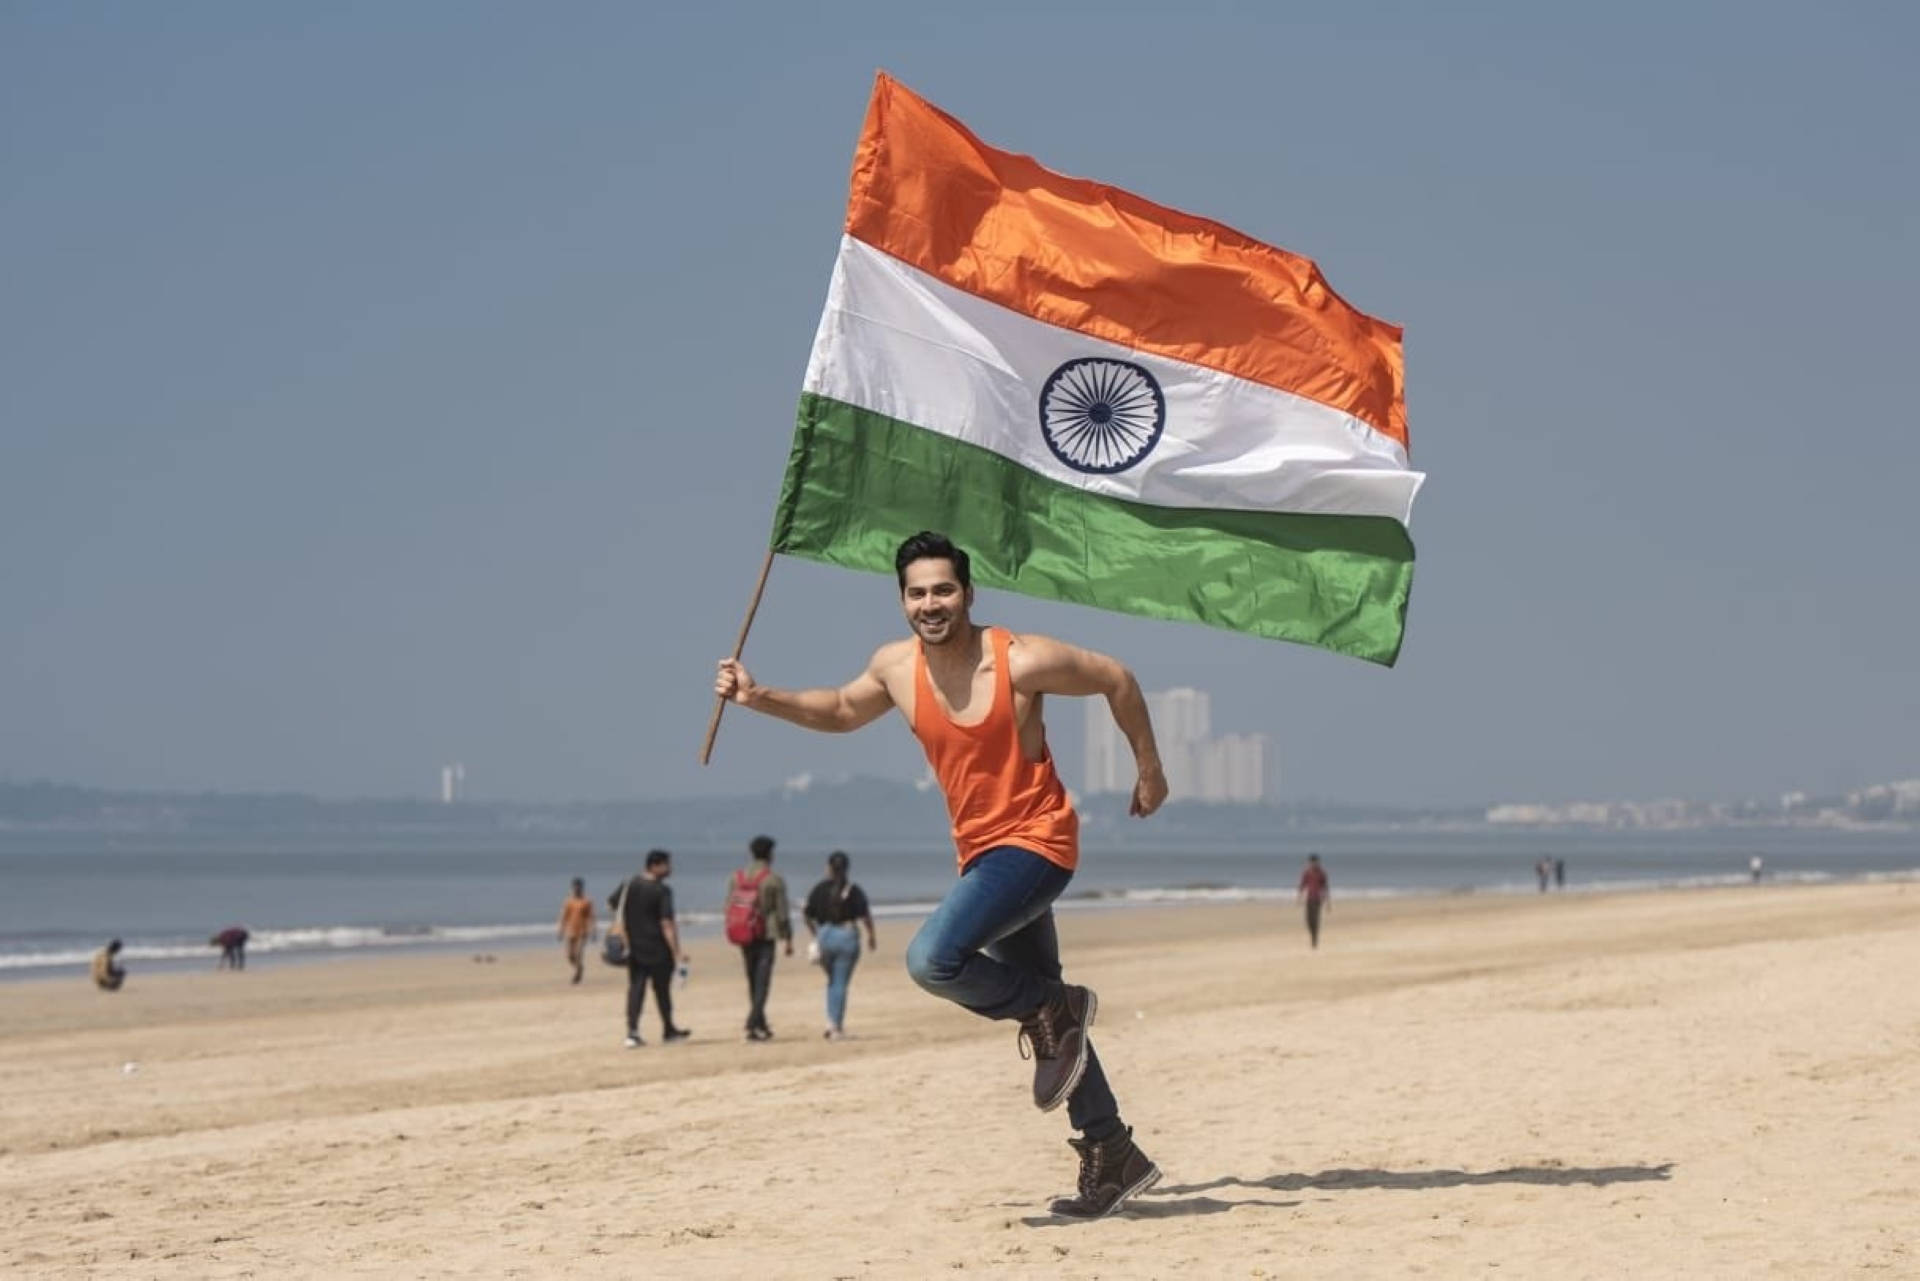 Varun Dhawan With The Indian Flag Background